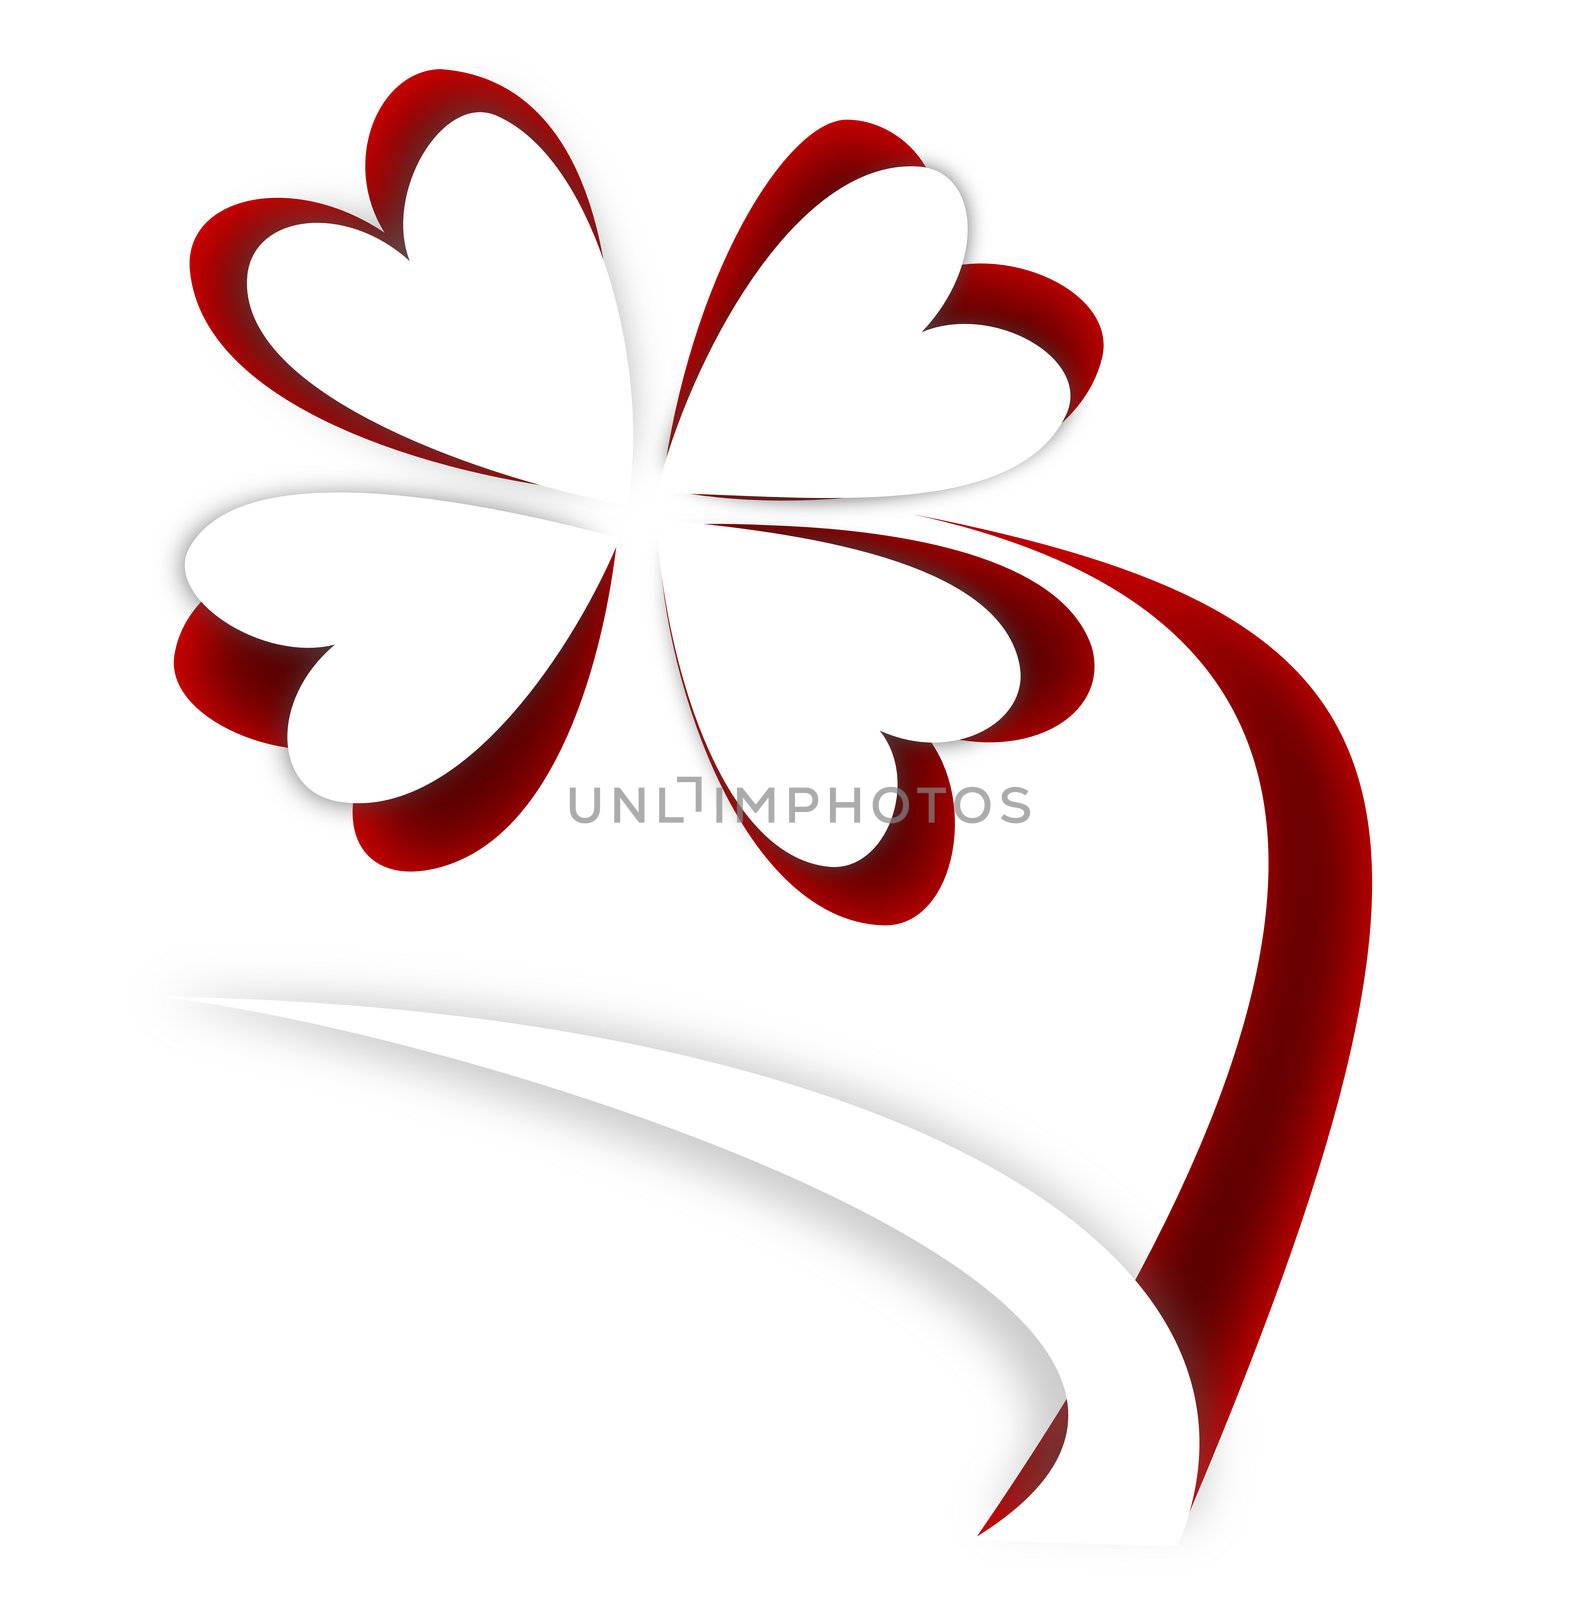 A flower with heart shaped petals cut out from a white paper placed on a red background